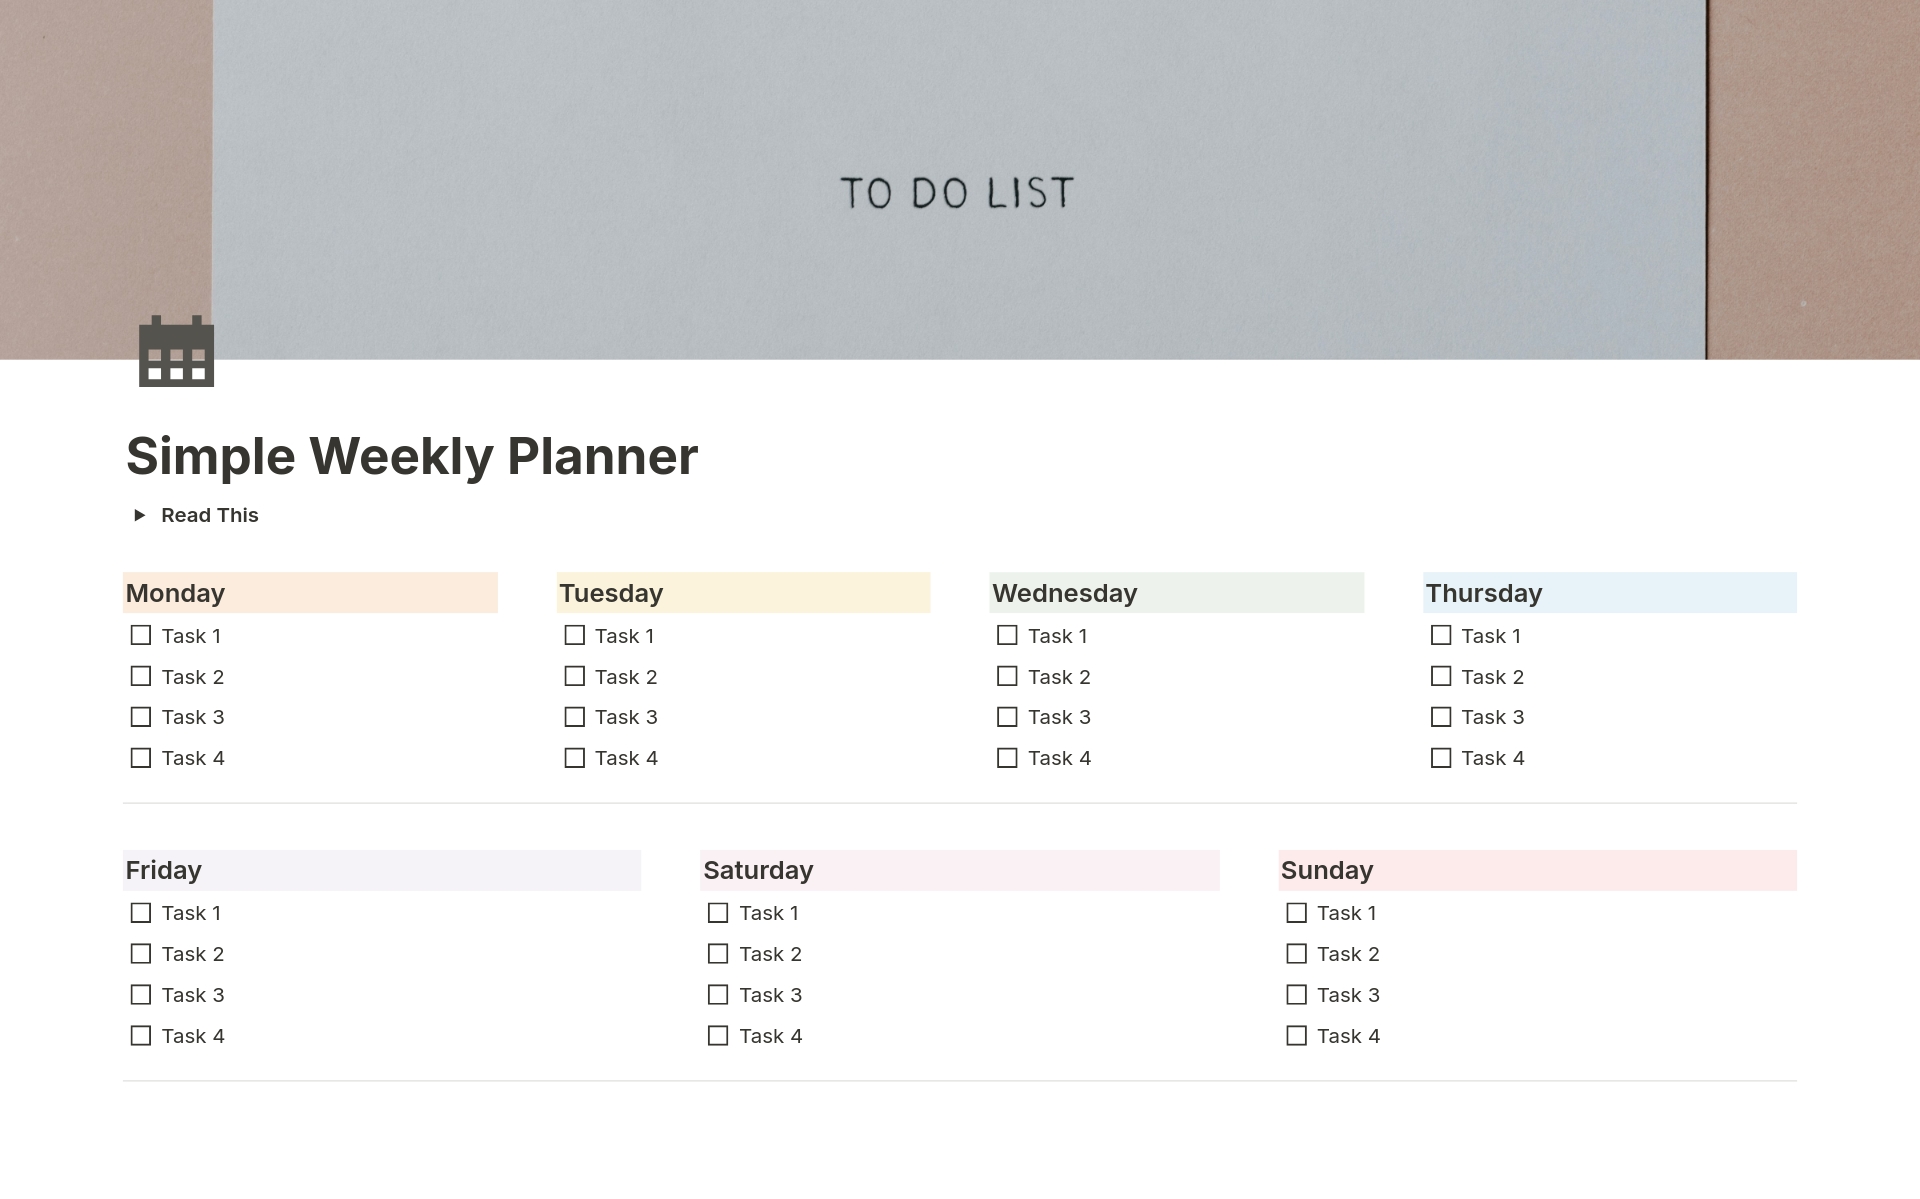 Plan your week with this template and you don't have to worry about all the notion customization, it's a simple template you can build in 1 minute.